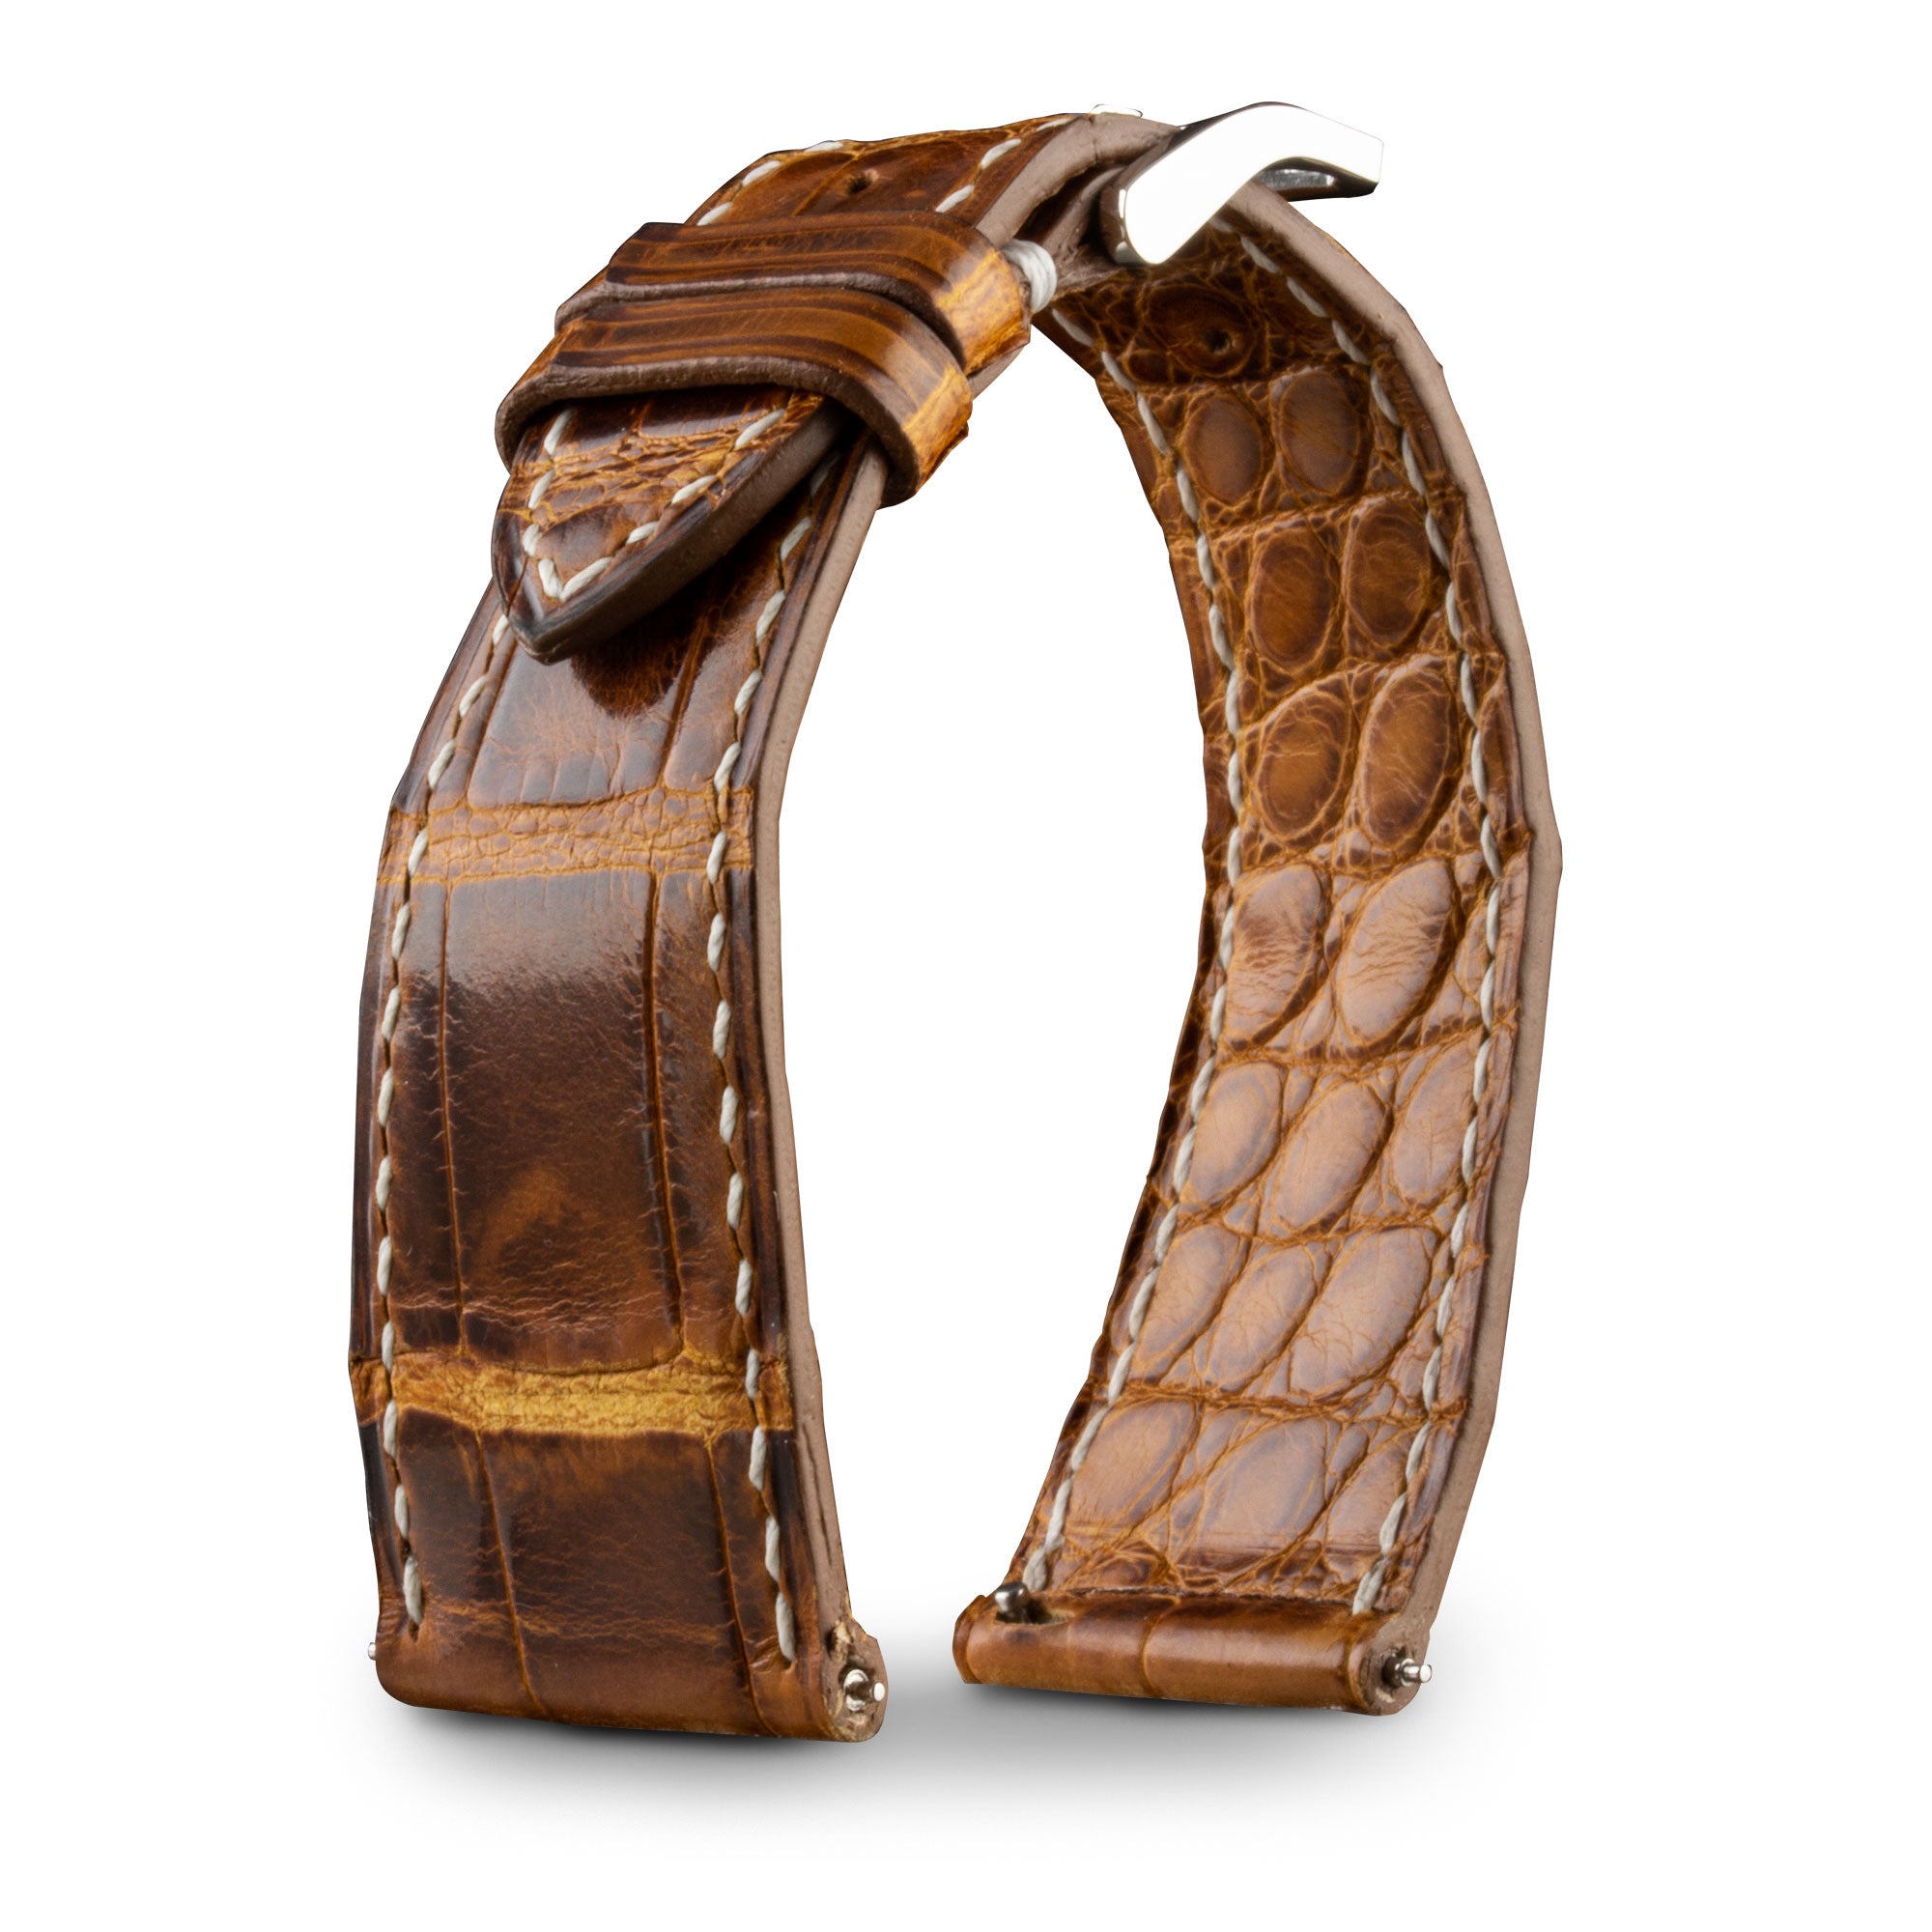 Leather watch band - Anatole Baker - Waxed brown alligator 